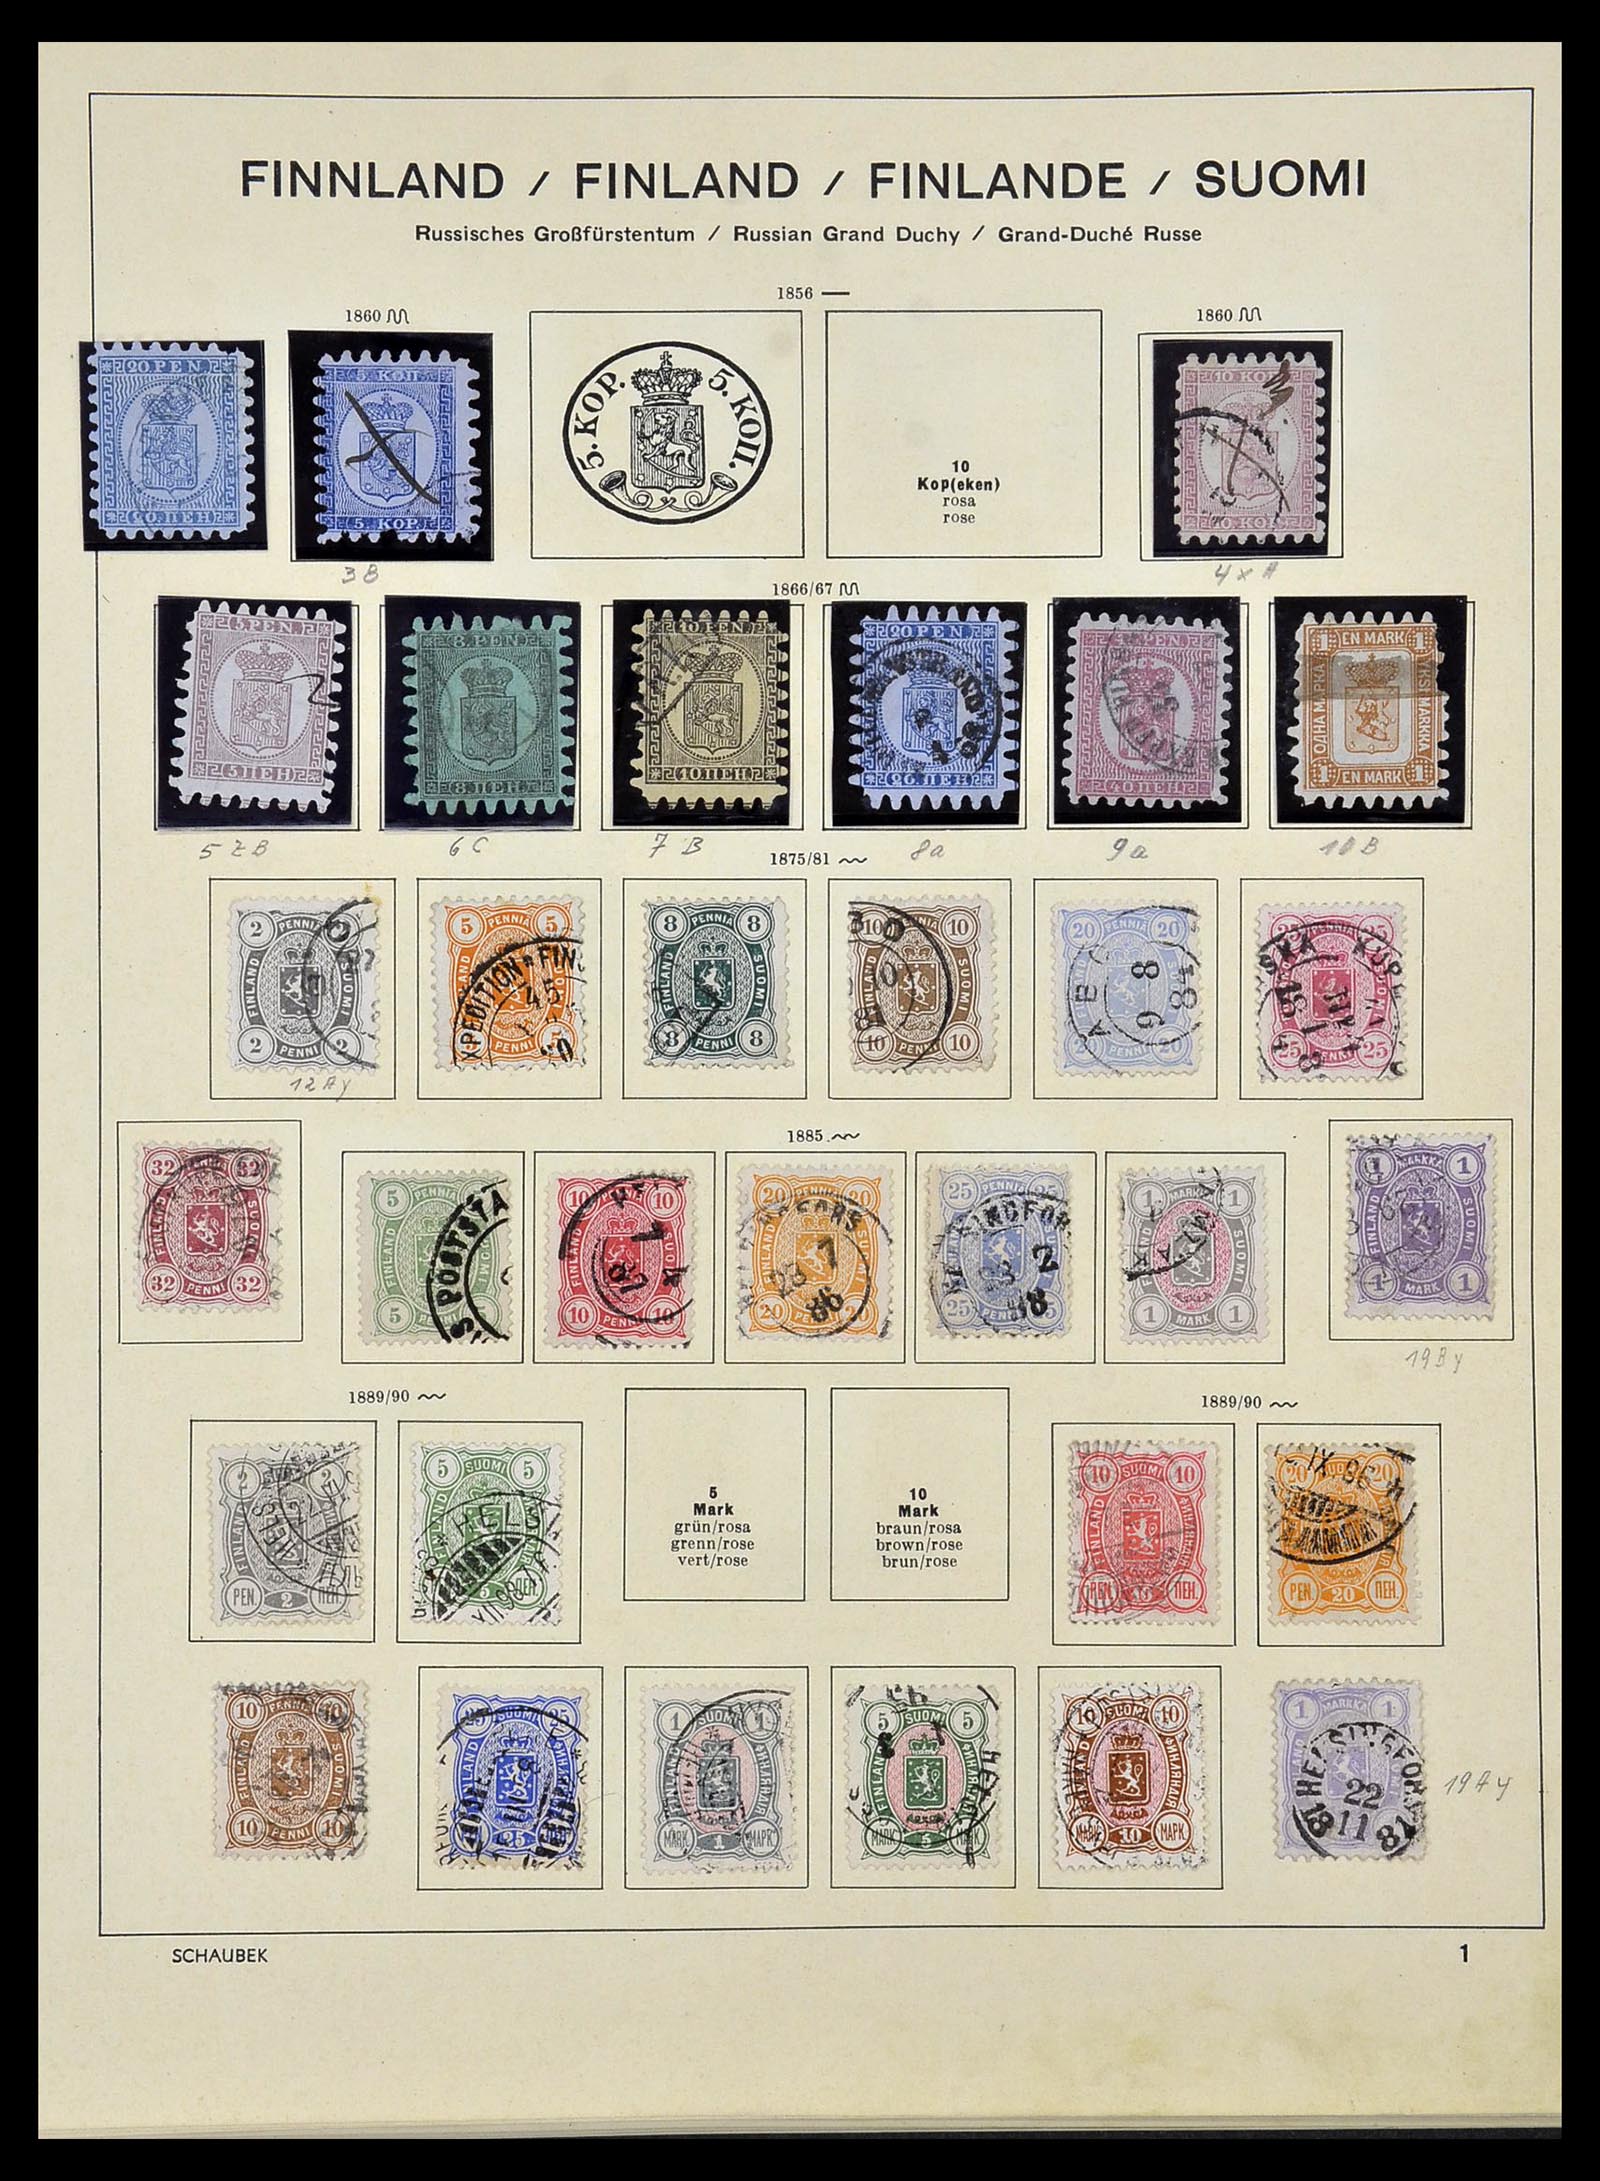 34101 001 - Stamp collection 34101 Finland 1860-1960.